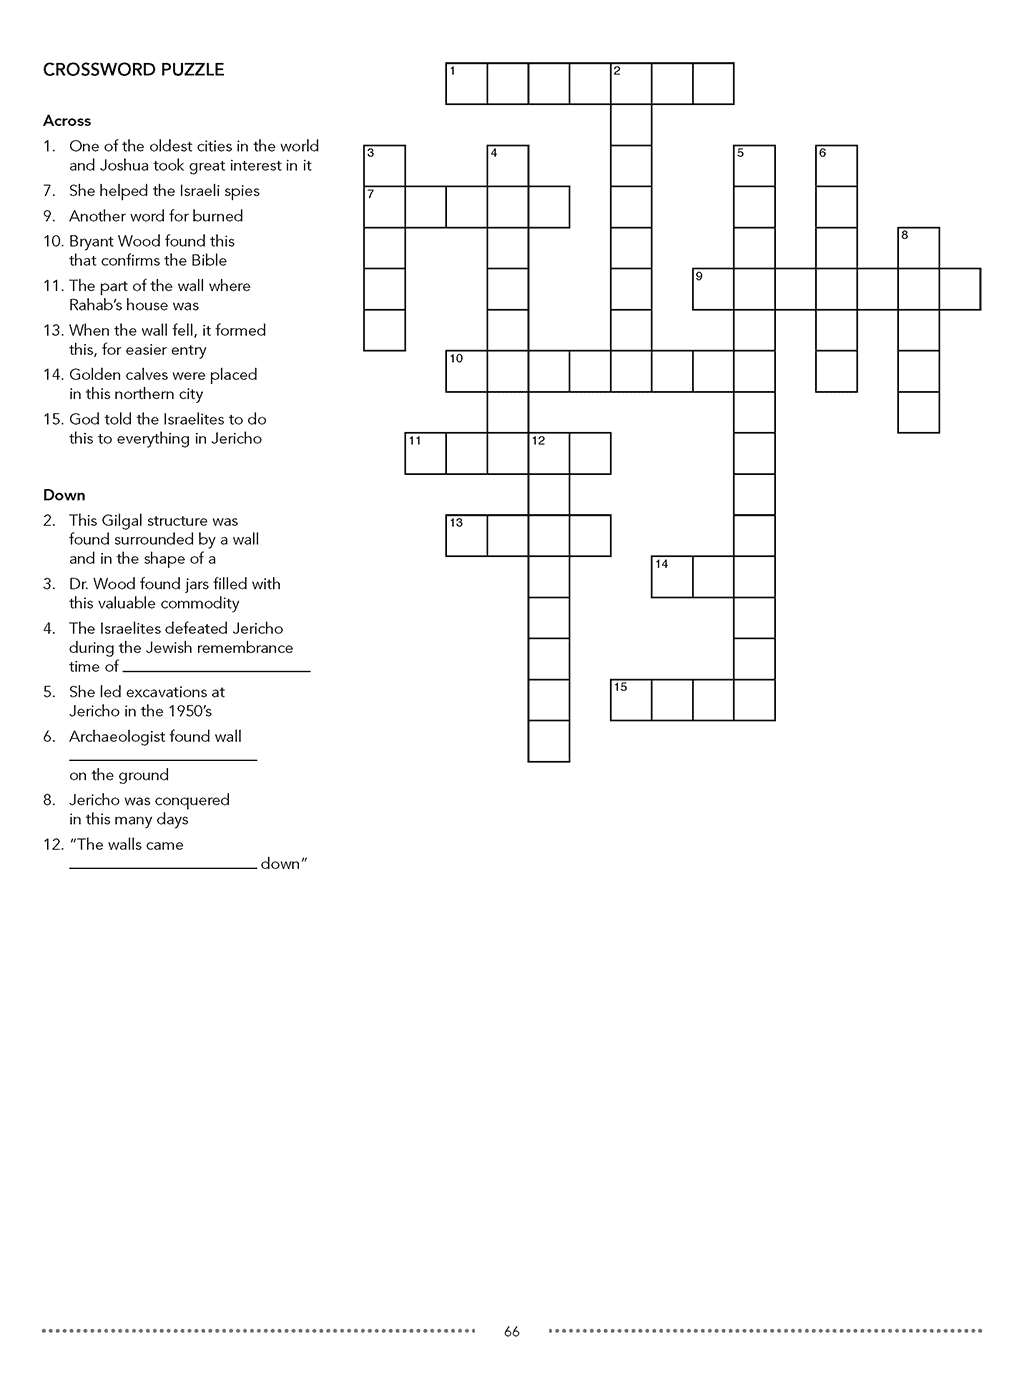 Unearthing the Bible online homeschool science sample workbook page 4 crossword puzzle